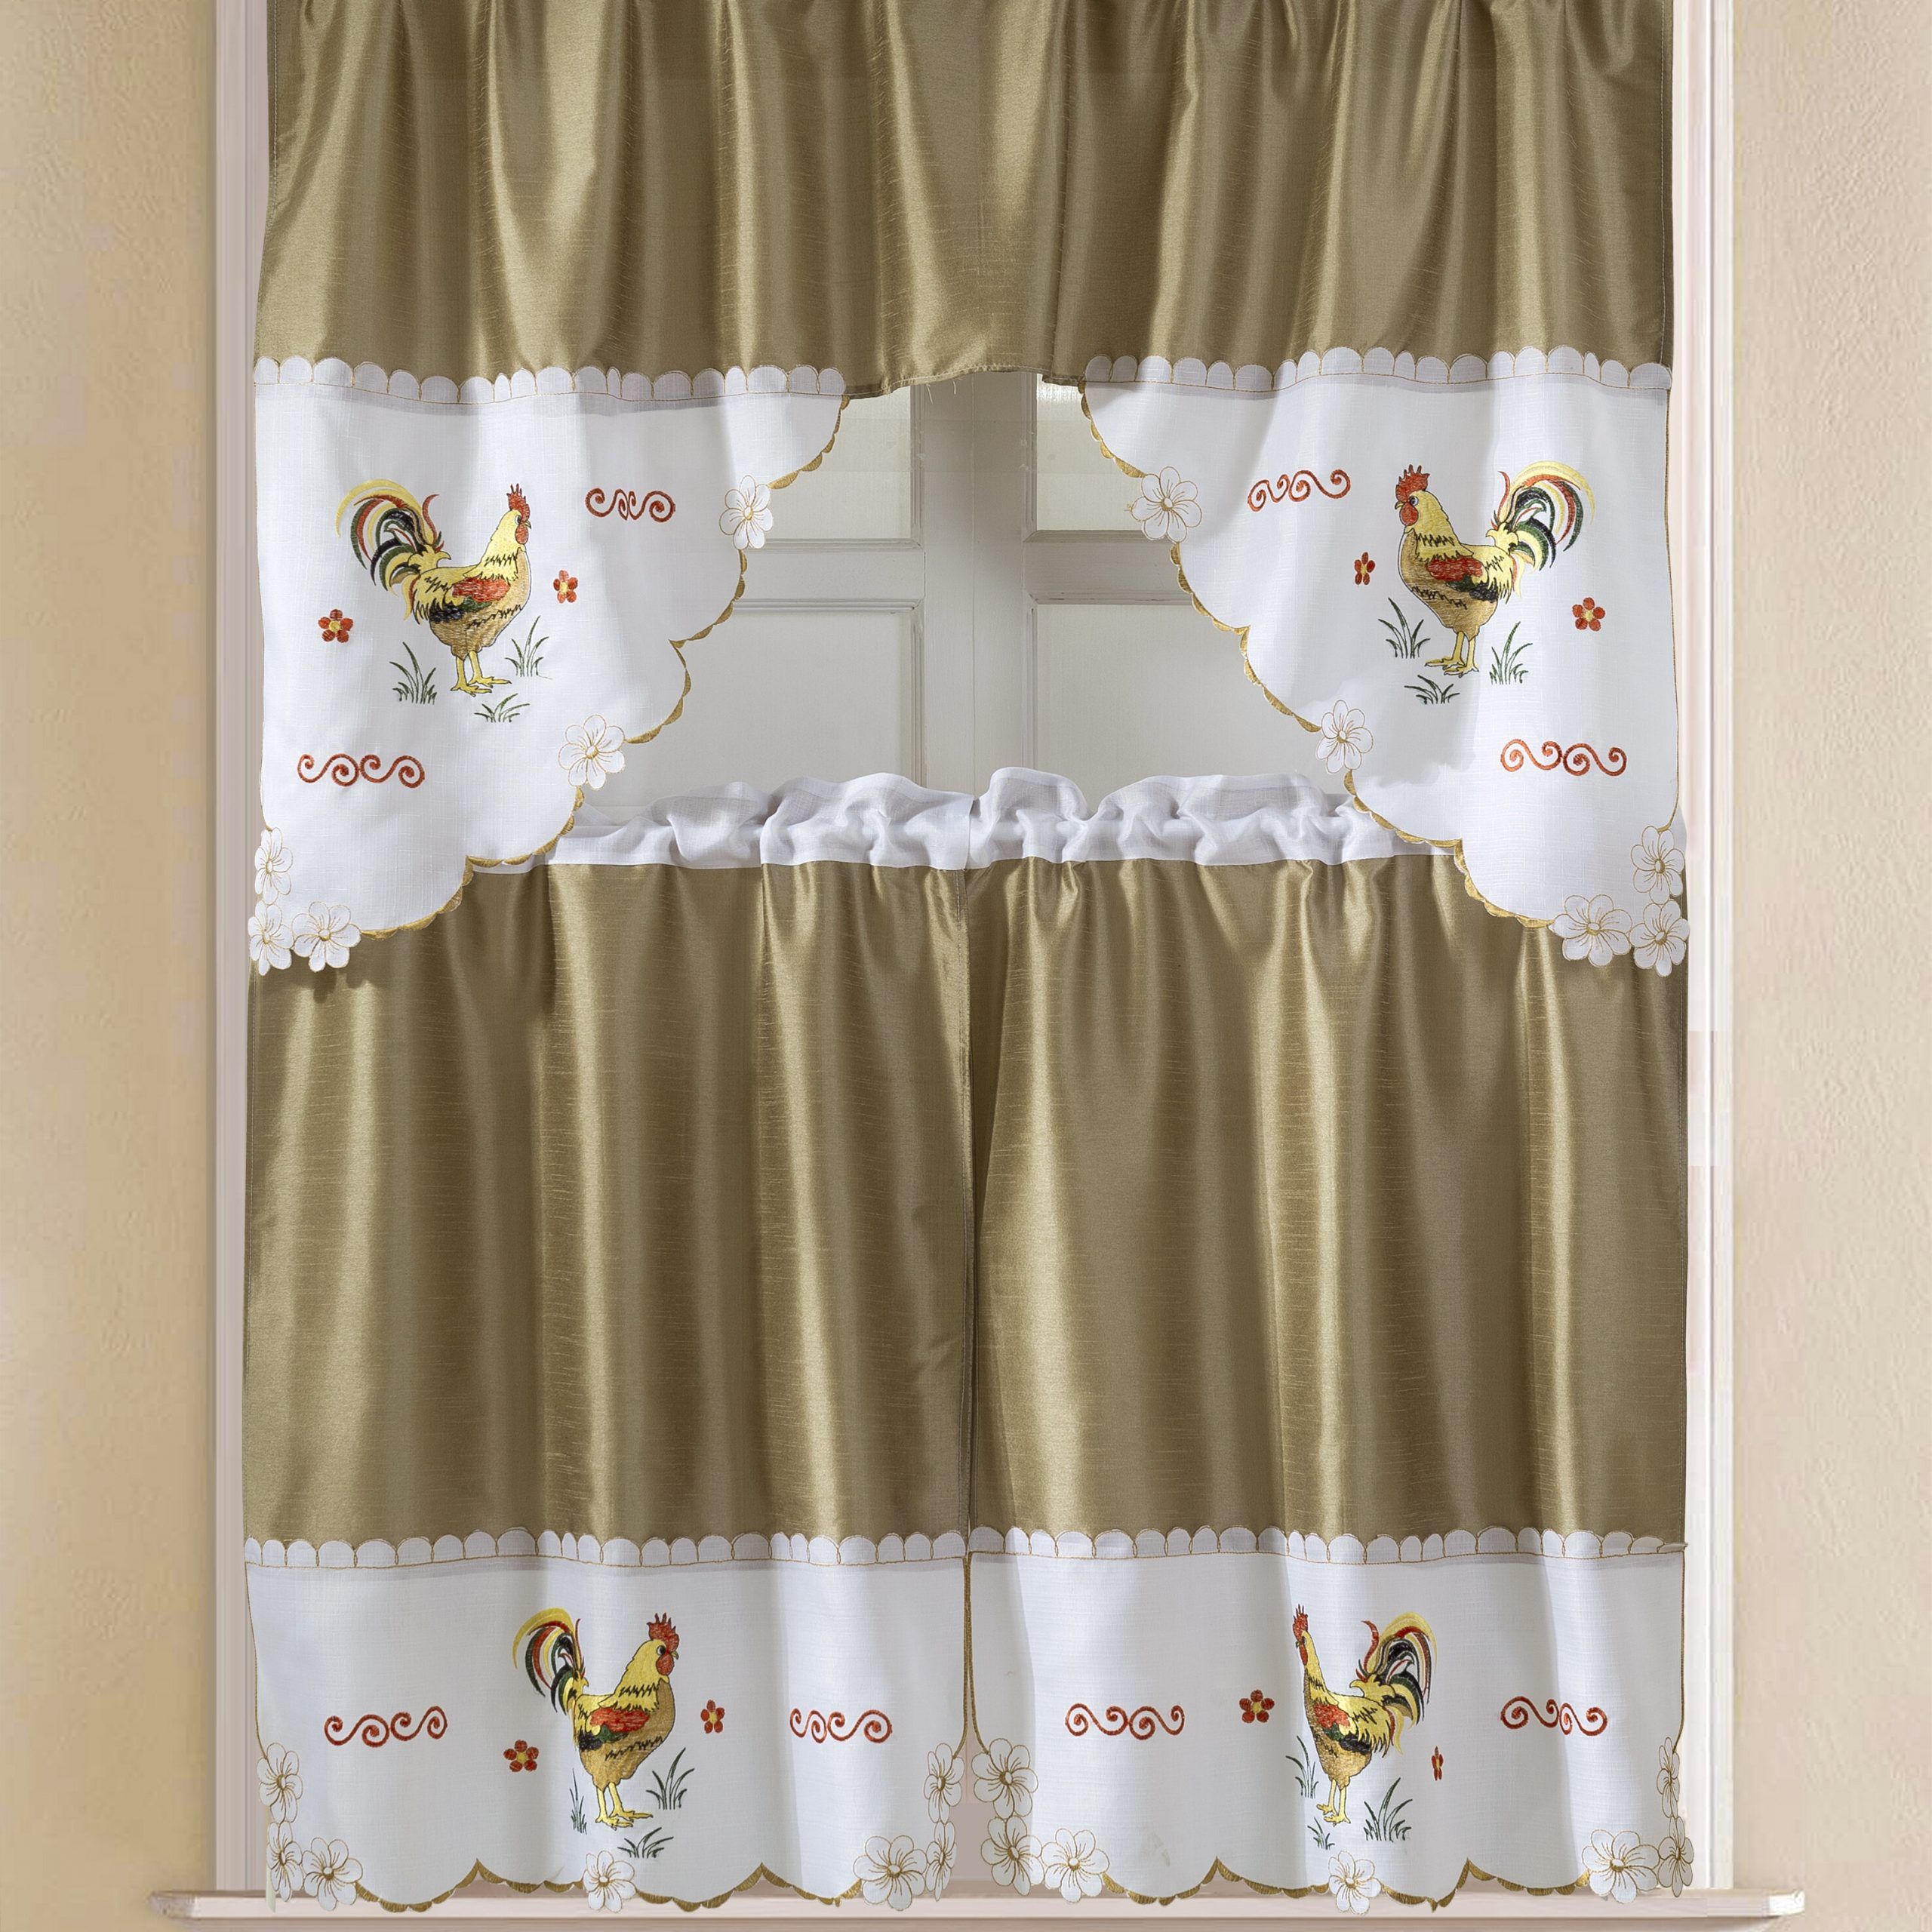 Sorrentino Faux Silk 3 Piece 60" Kitchen Curtain Set Pertaining To Faux Silk 3 Piece Kitchen Curtain Sets (View 3 of 20)